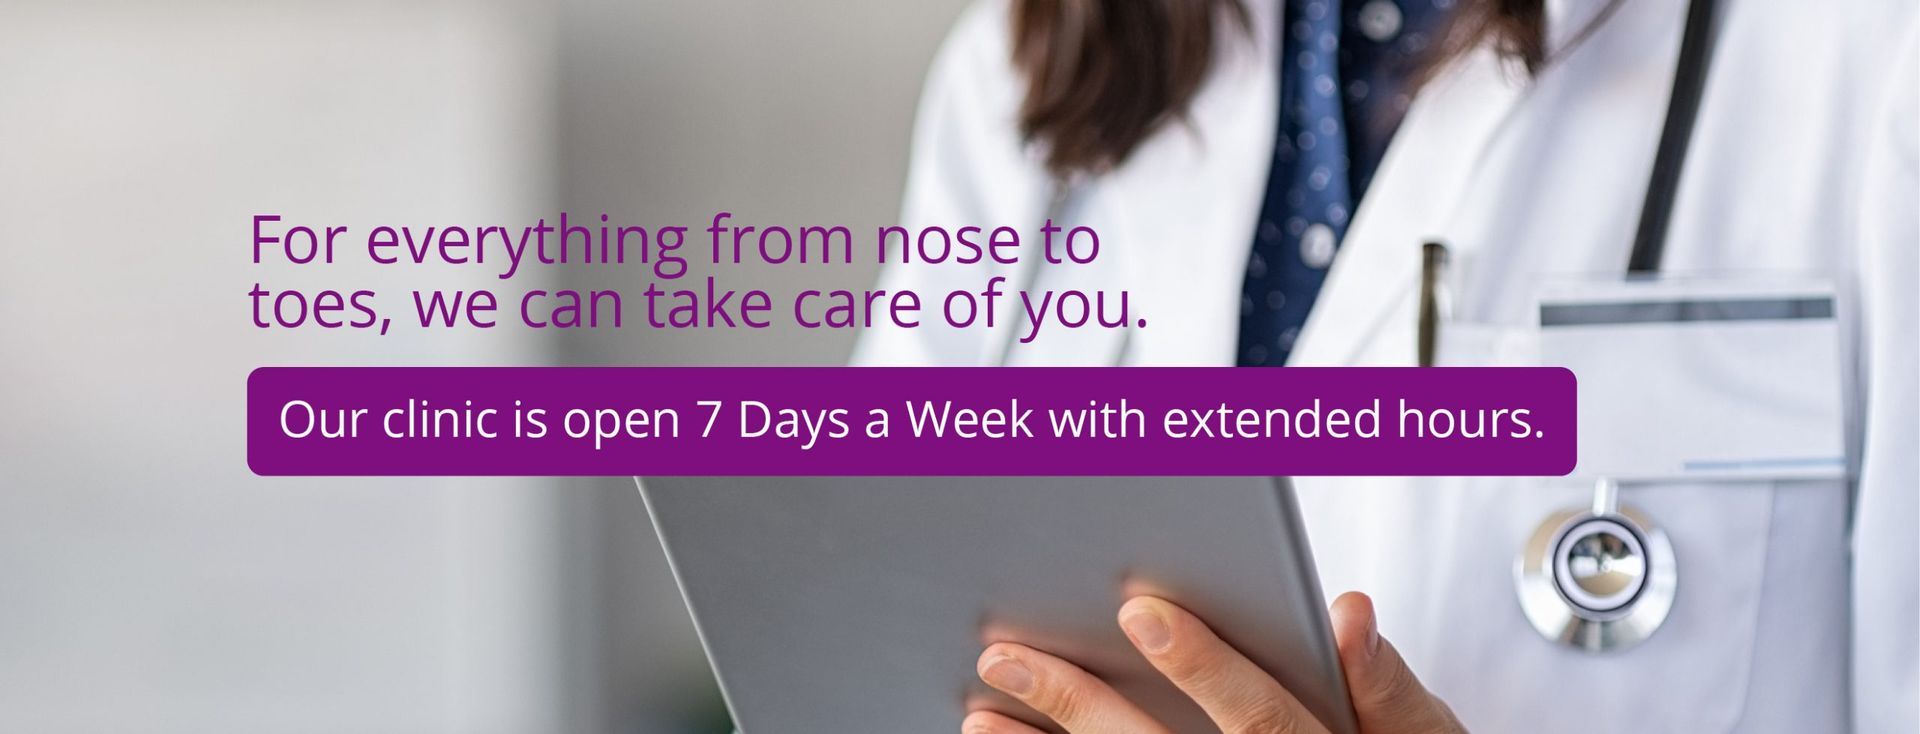 for everything from your nose to your toes, we can take care of you. our clinic is open 7 days a week with extended hours.